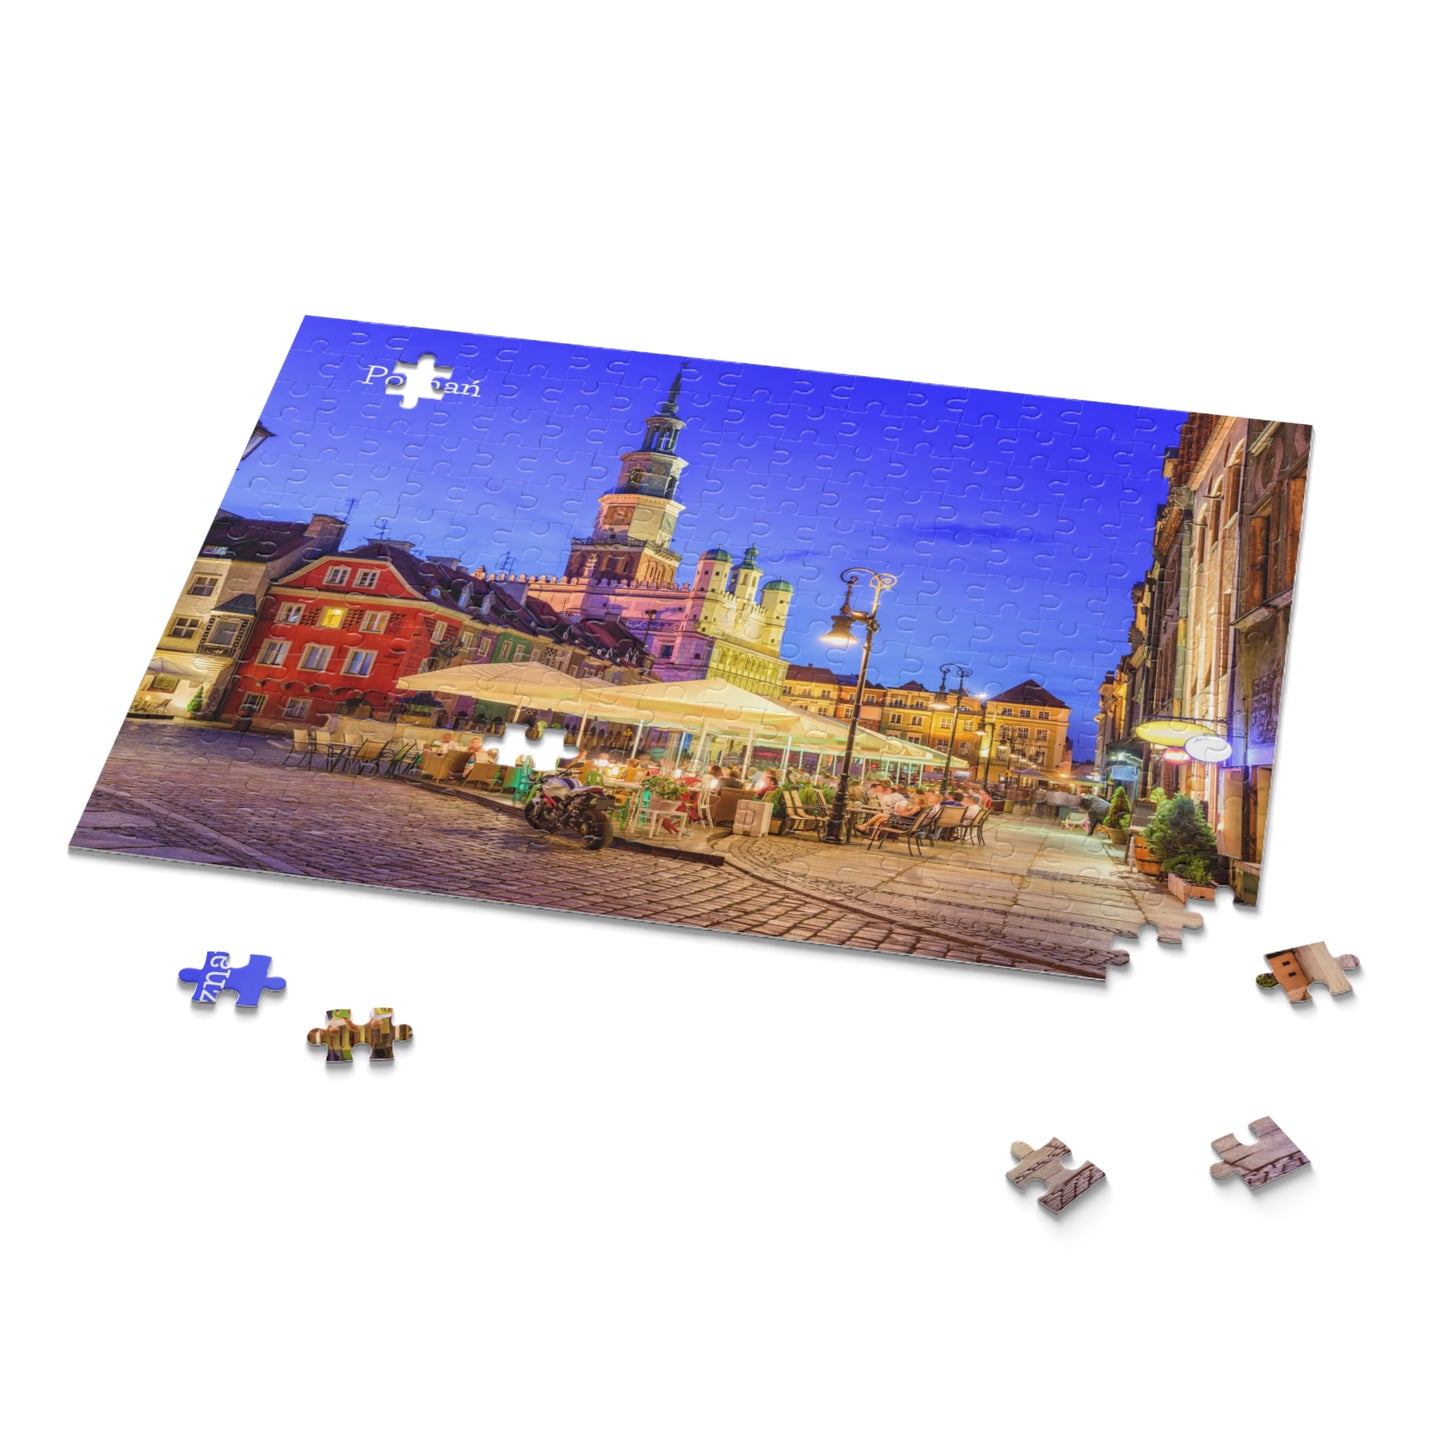 Poznan City of Poland Puzzle (120, 252, 500-Piece) Family Fun Perfect Gift